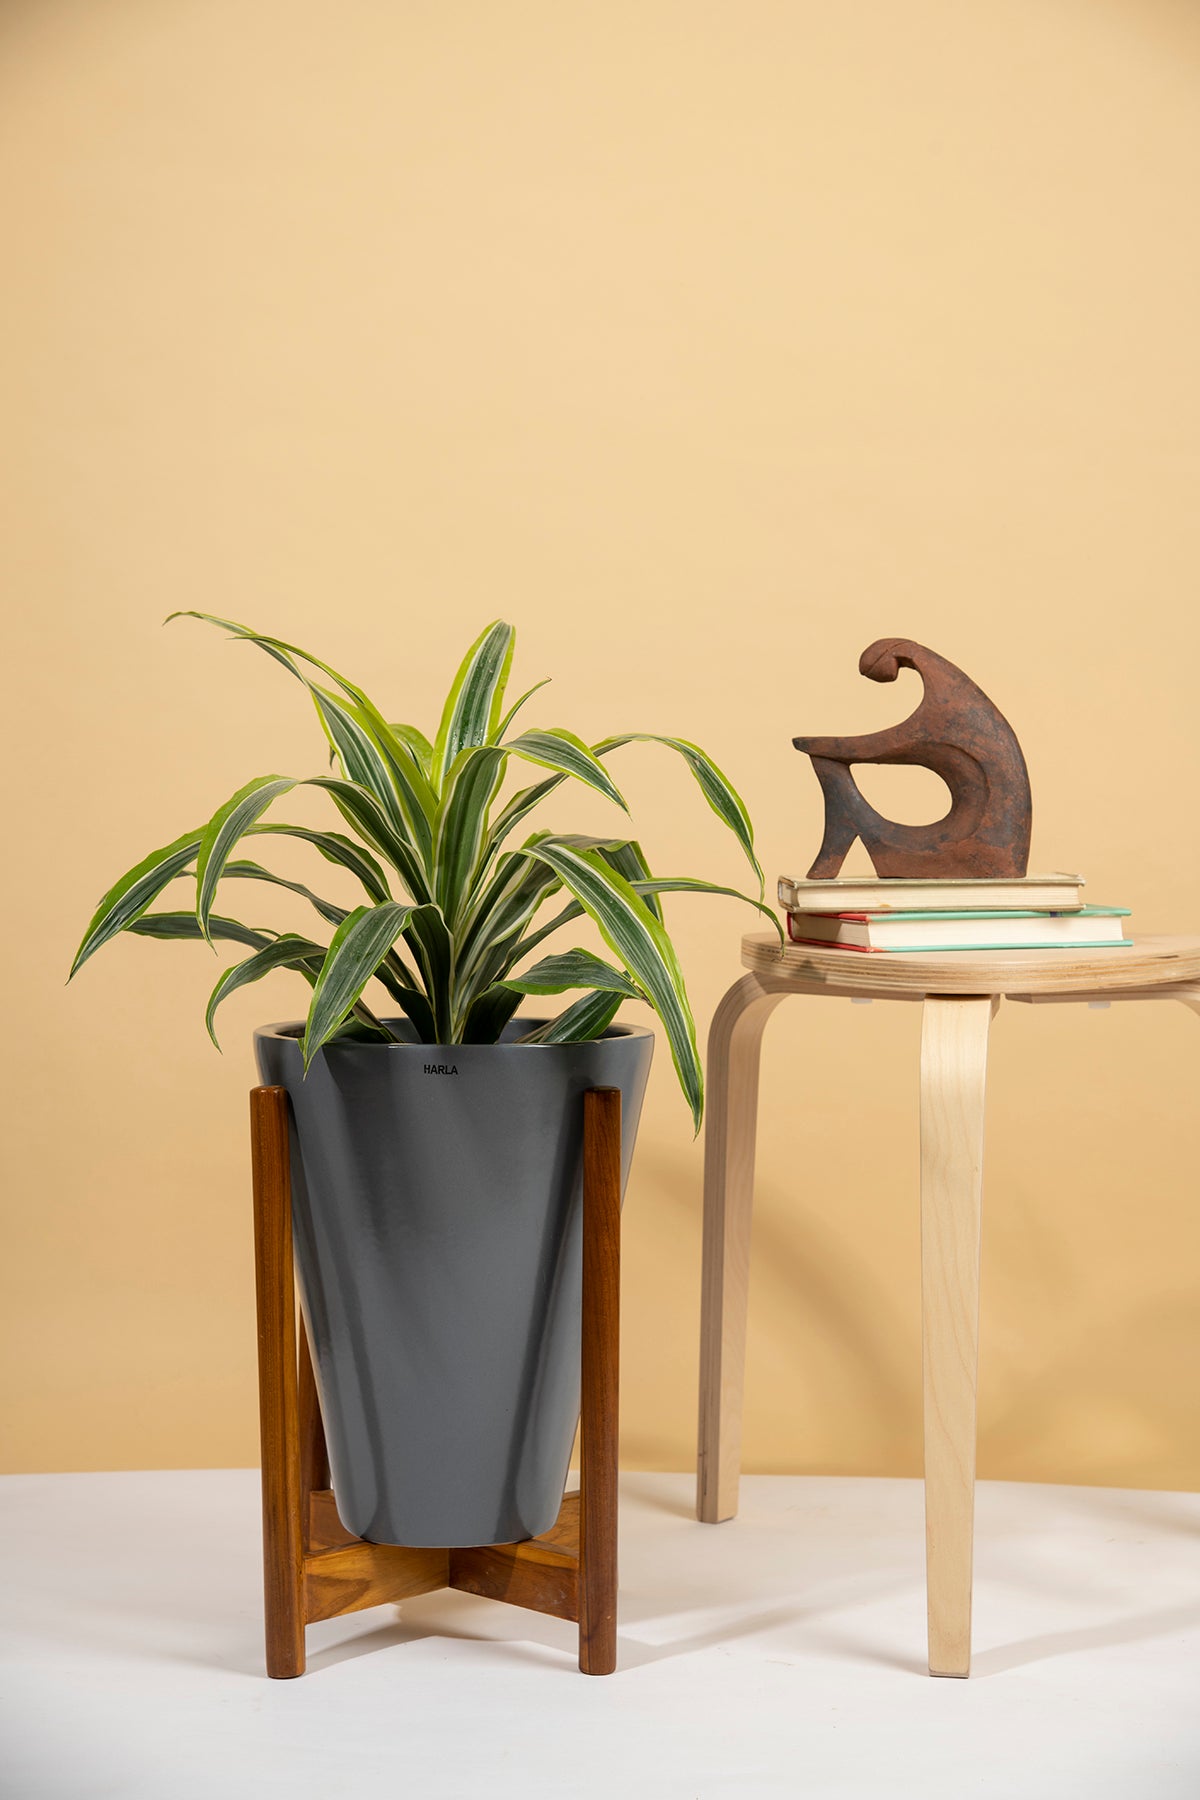 Large Size Love Bite ceramic planter with wooden stand in Grey color with spider plant in it.